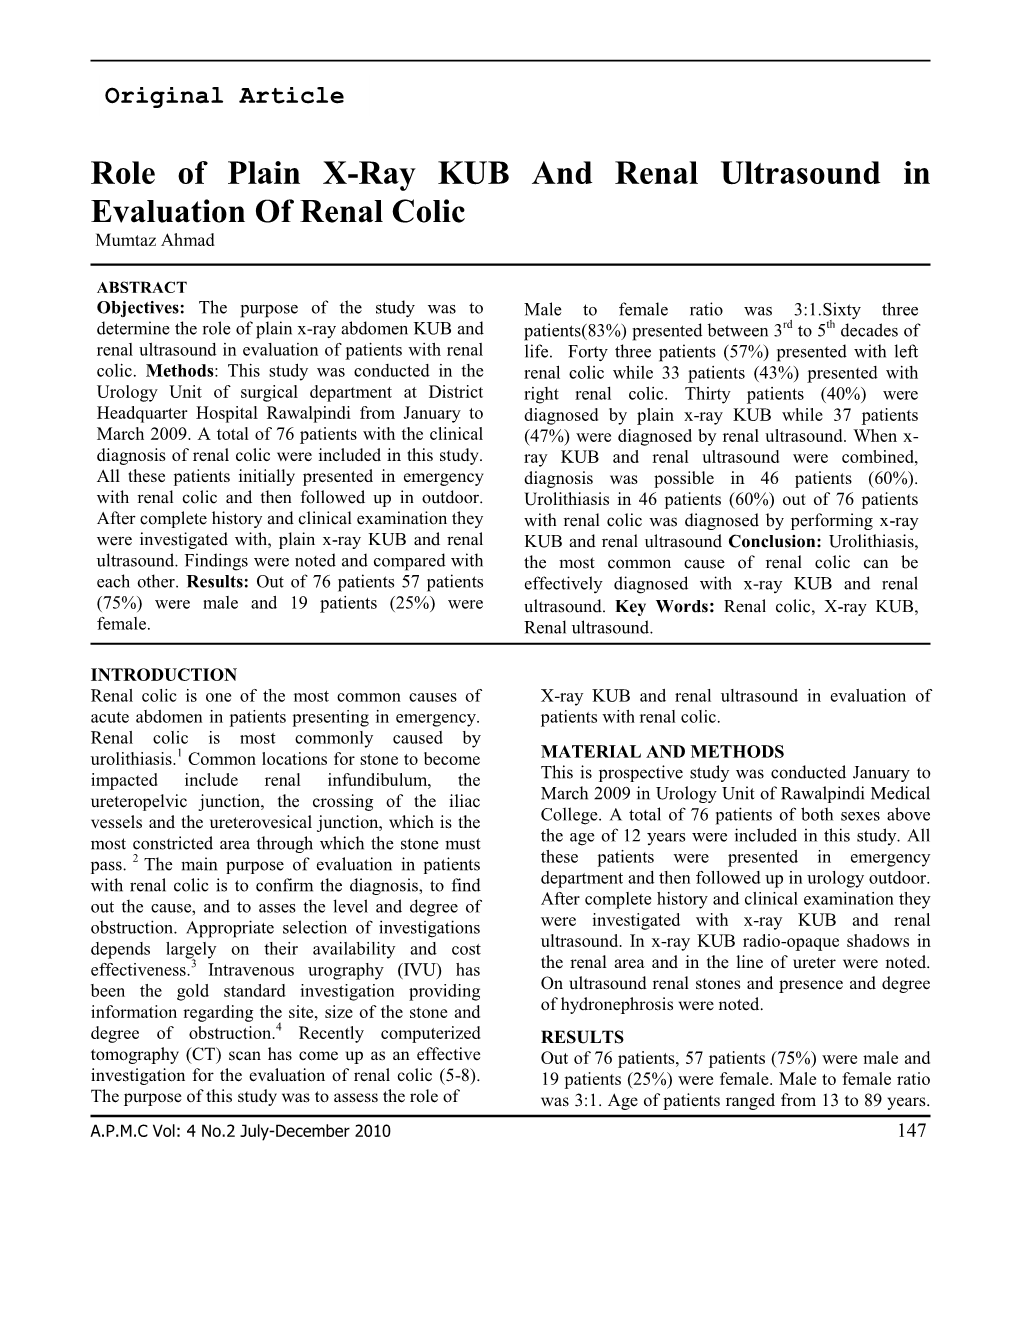 Role of Plain X-Ray KUB and Renal Ultrasound in Evaluation